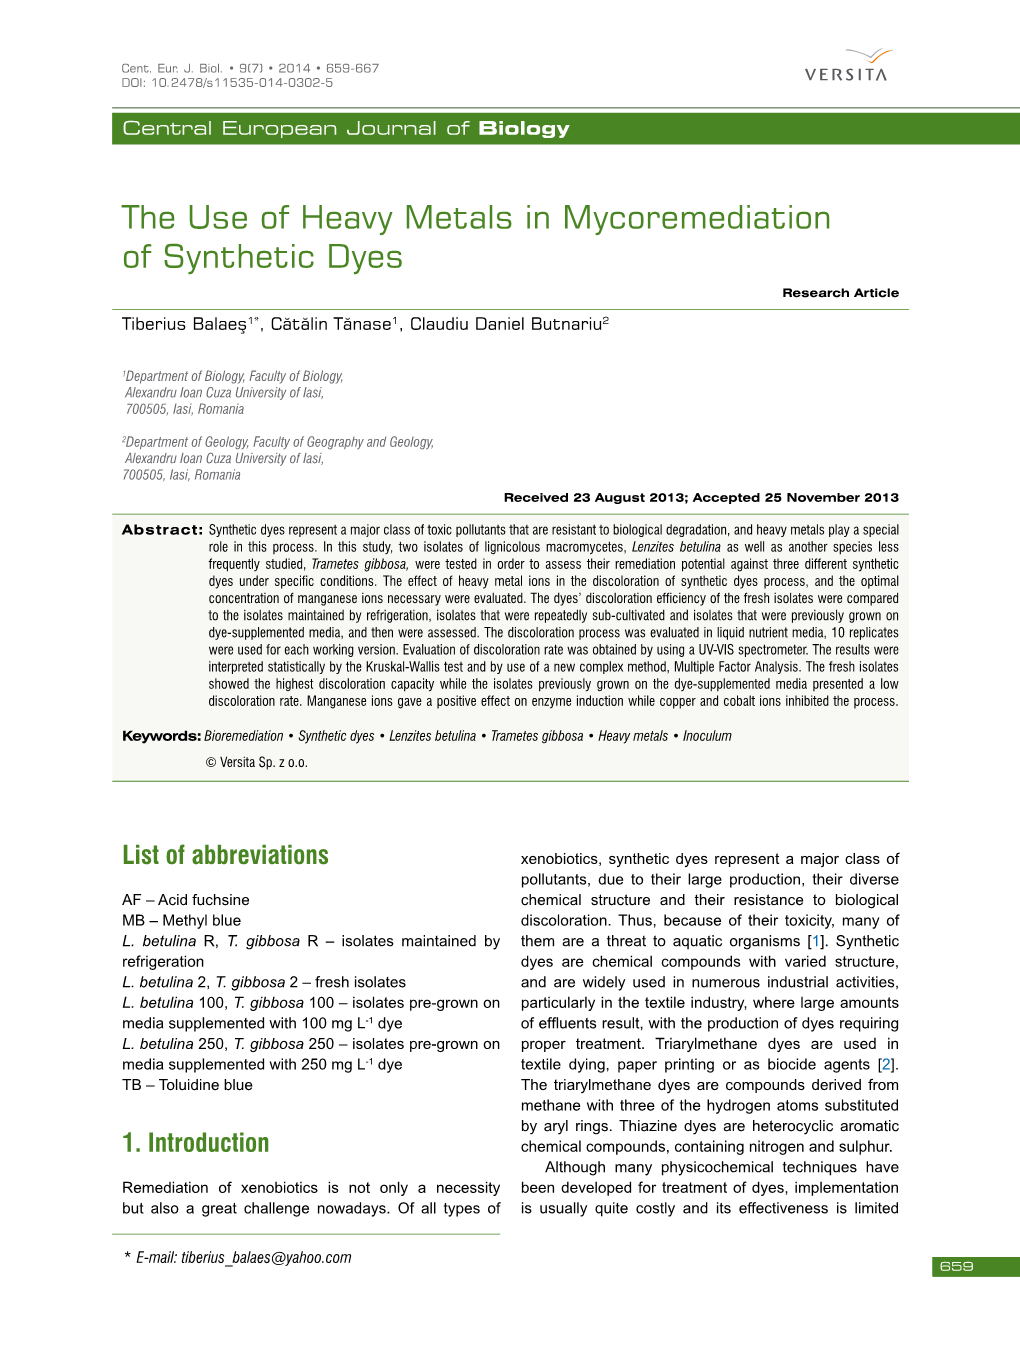 The Use of Heavy Metals in Mycoremediation of Synthetic Dyes